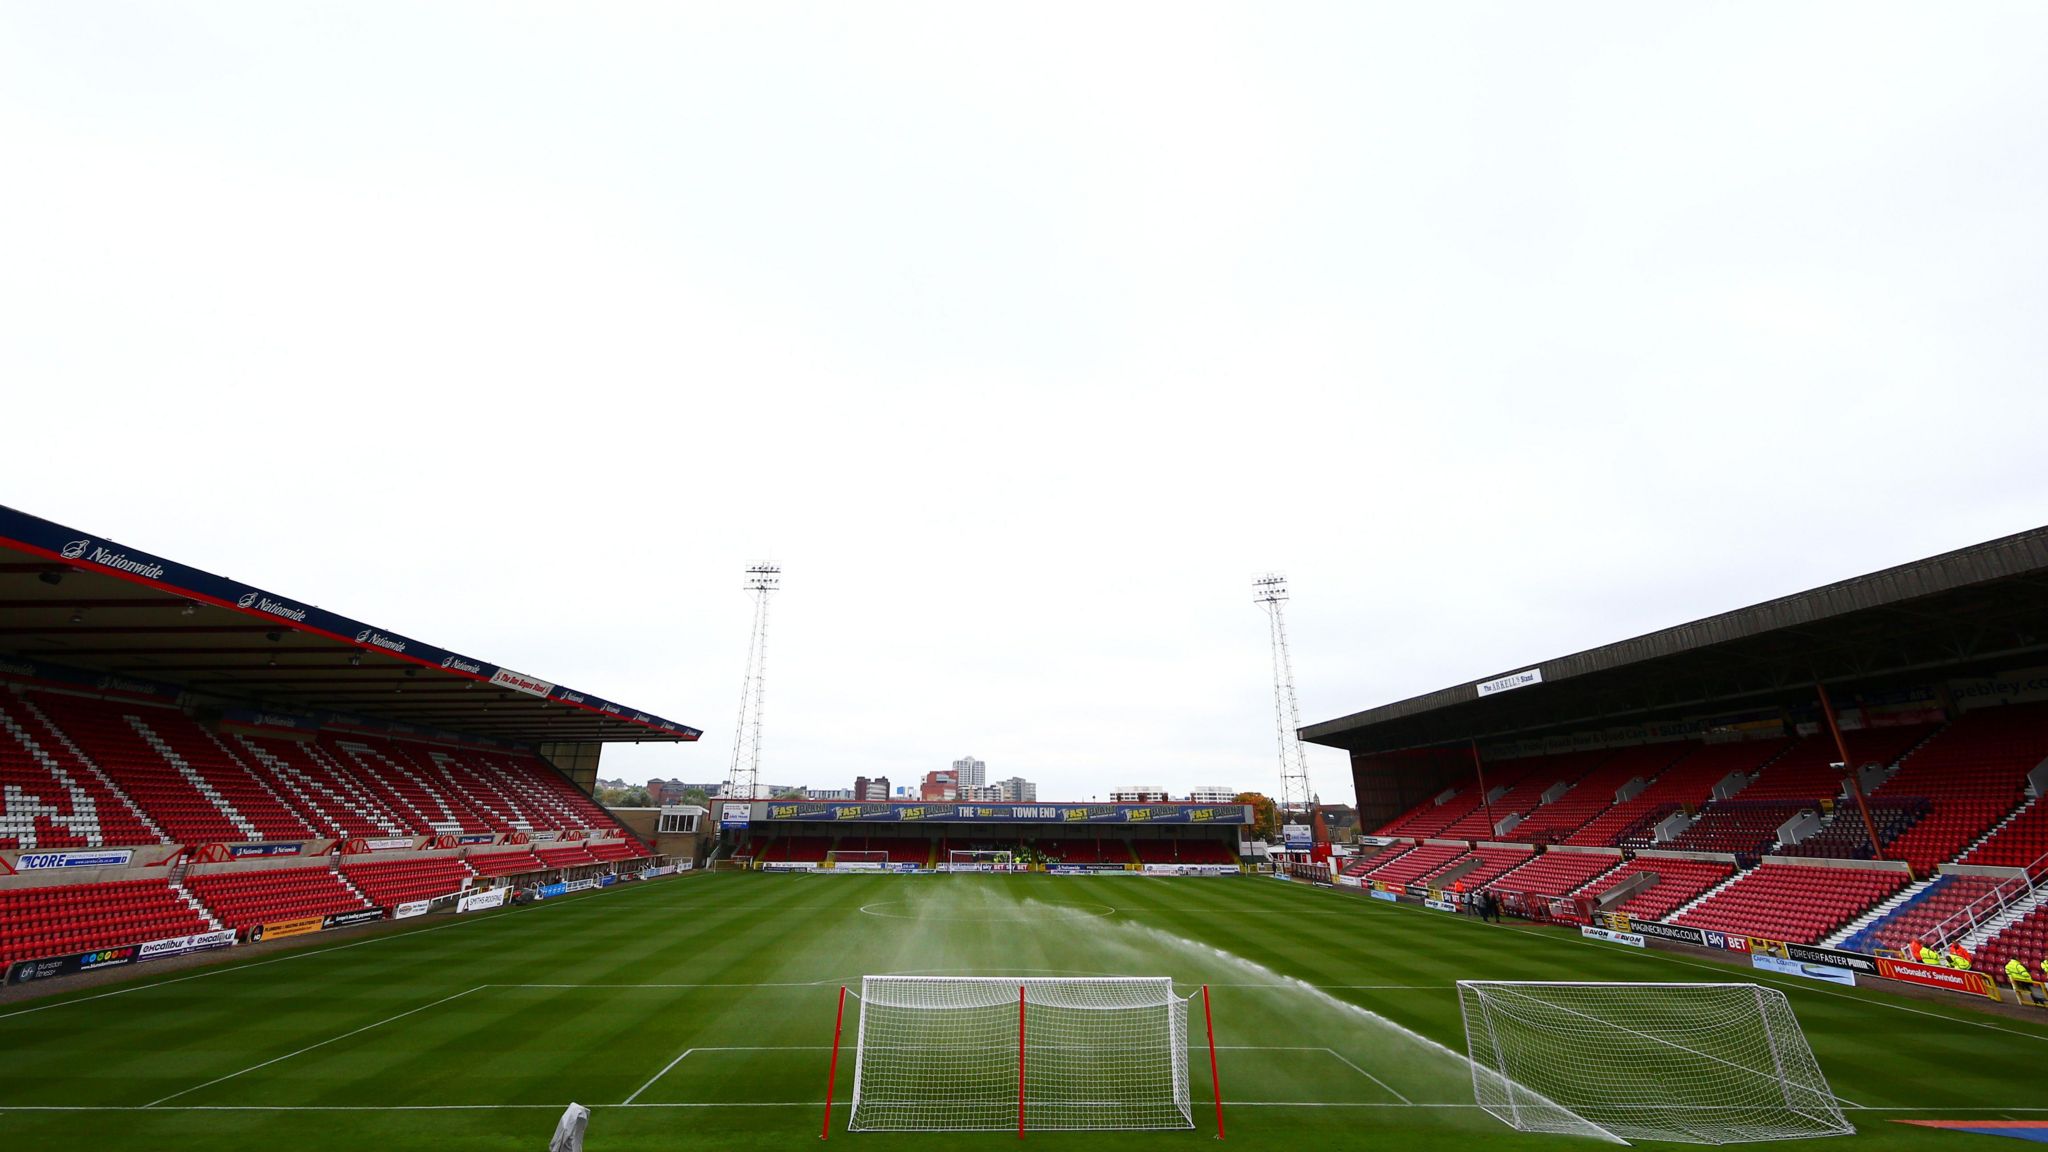 A wide shot showing Swindon Town's County Ground stadium